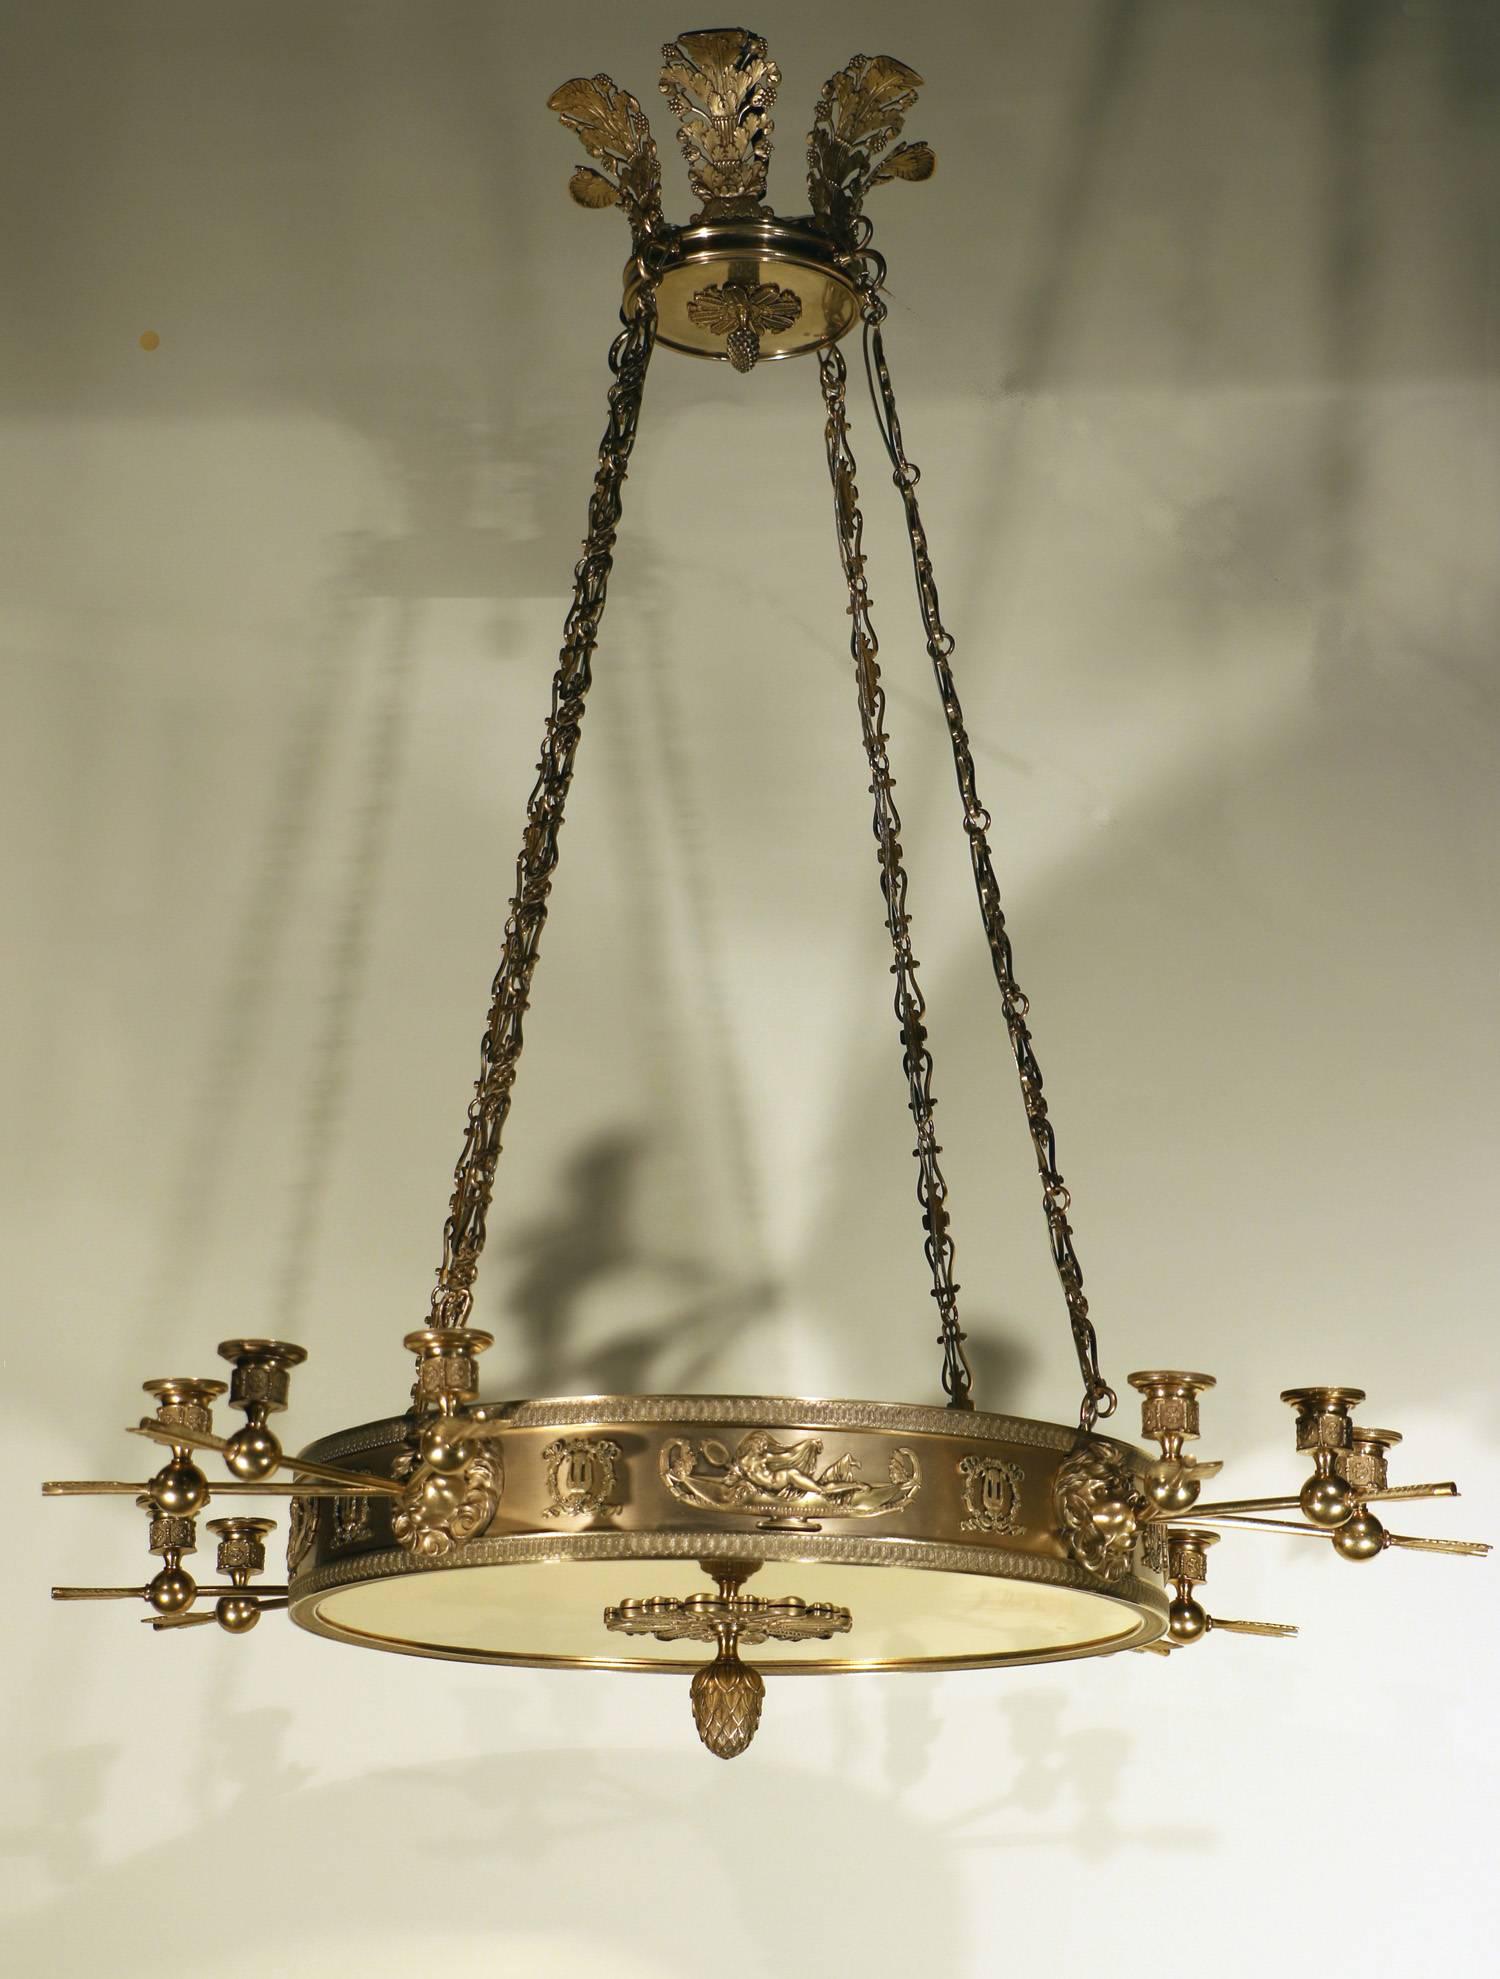 French Empire chandelier in two-tone gilt bronze. With eight interior light sockets and 12 candle cups on fleche arms protruding from lions mouths on a decorative band with cartouches of Greek maidens reclining in boats and lyres in wreaths. All